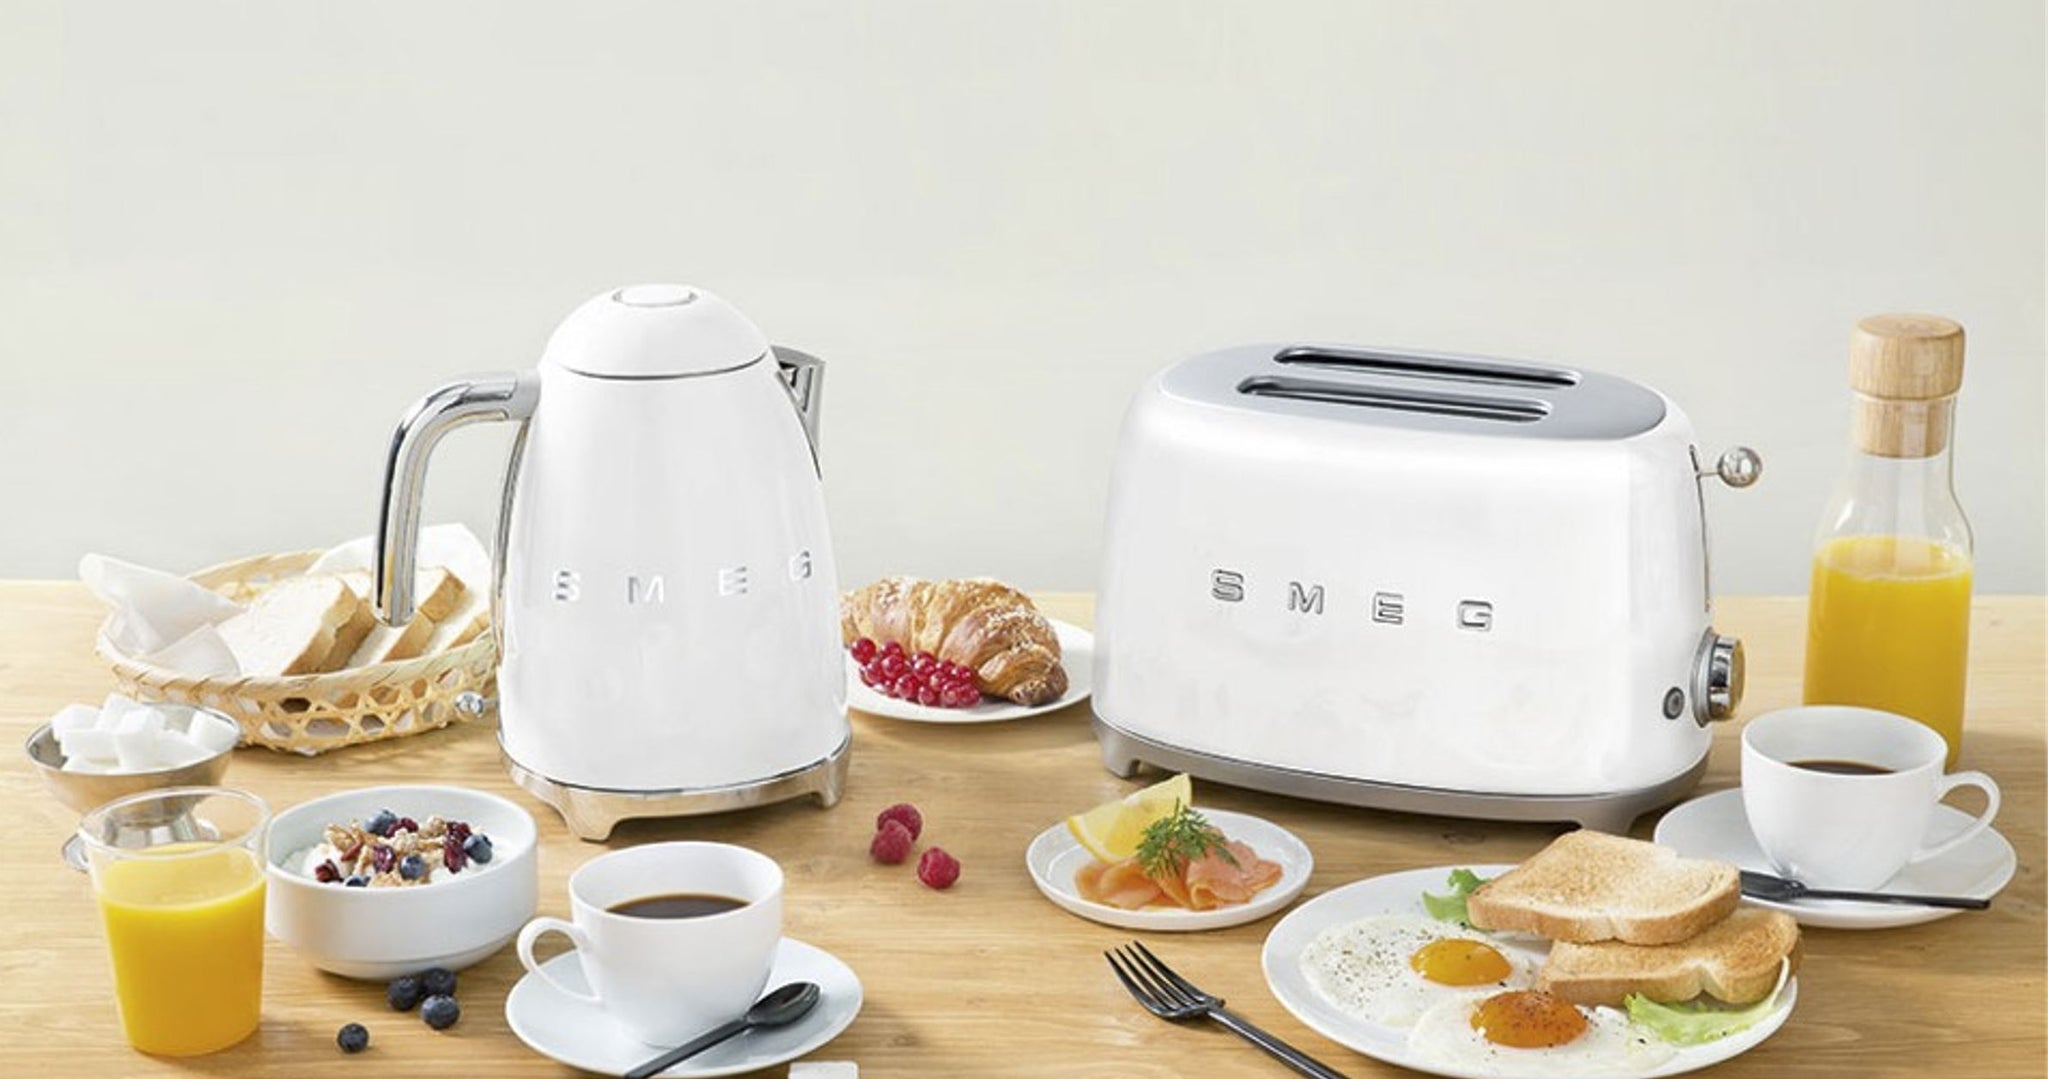 Smeg Small Home Appliances Collections - Best Price –